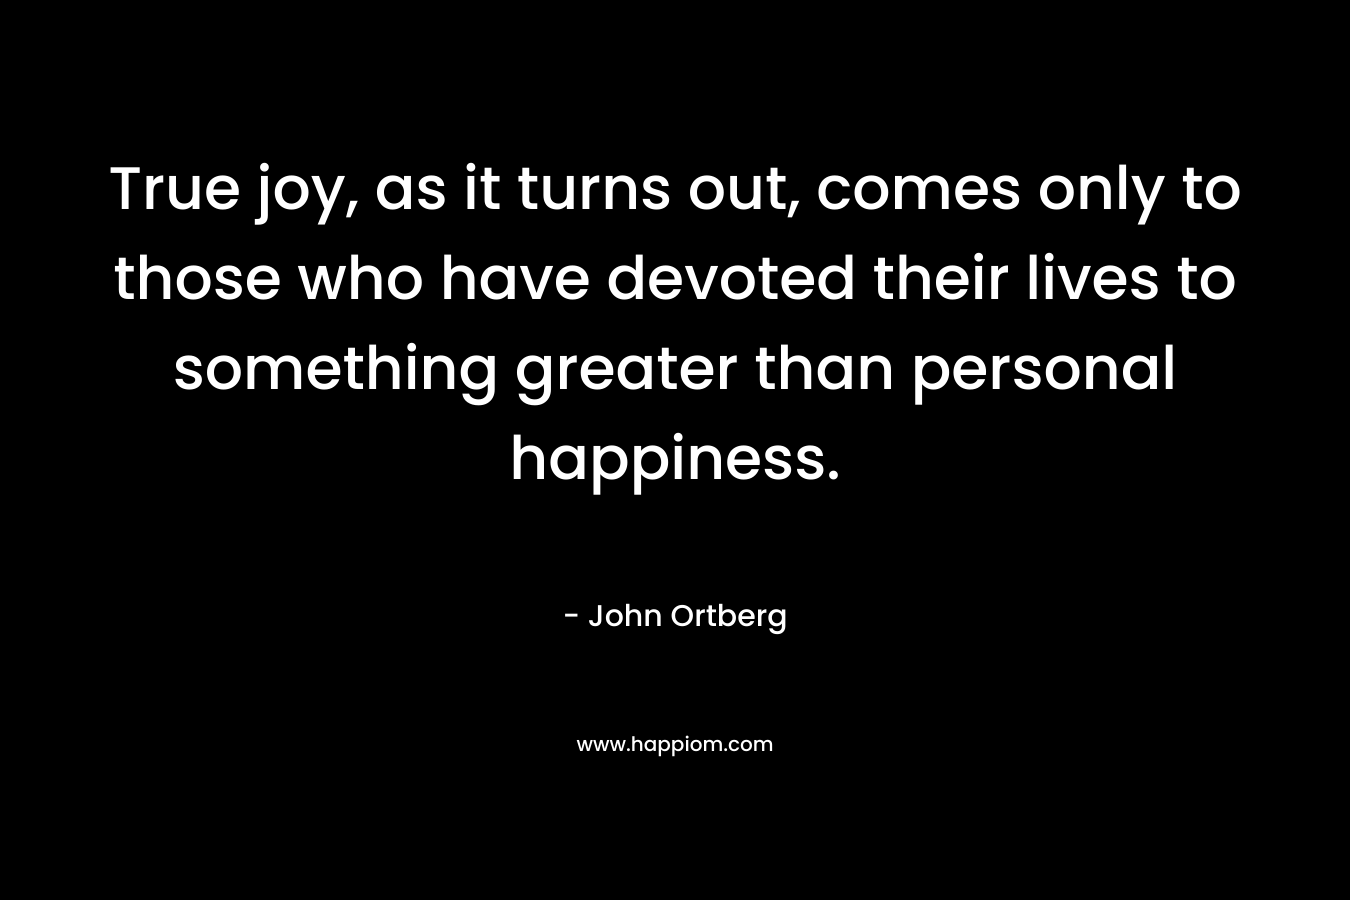 True joy, as it turns out, comes only to those who have devoted their lives to something greater than personal happiness. – John Ortberg